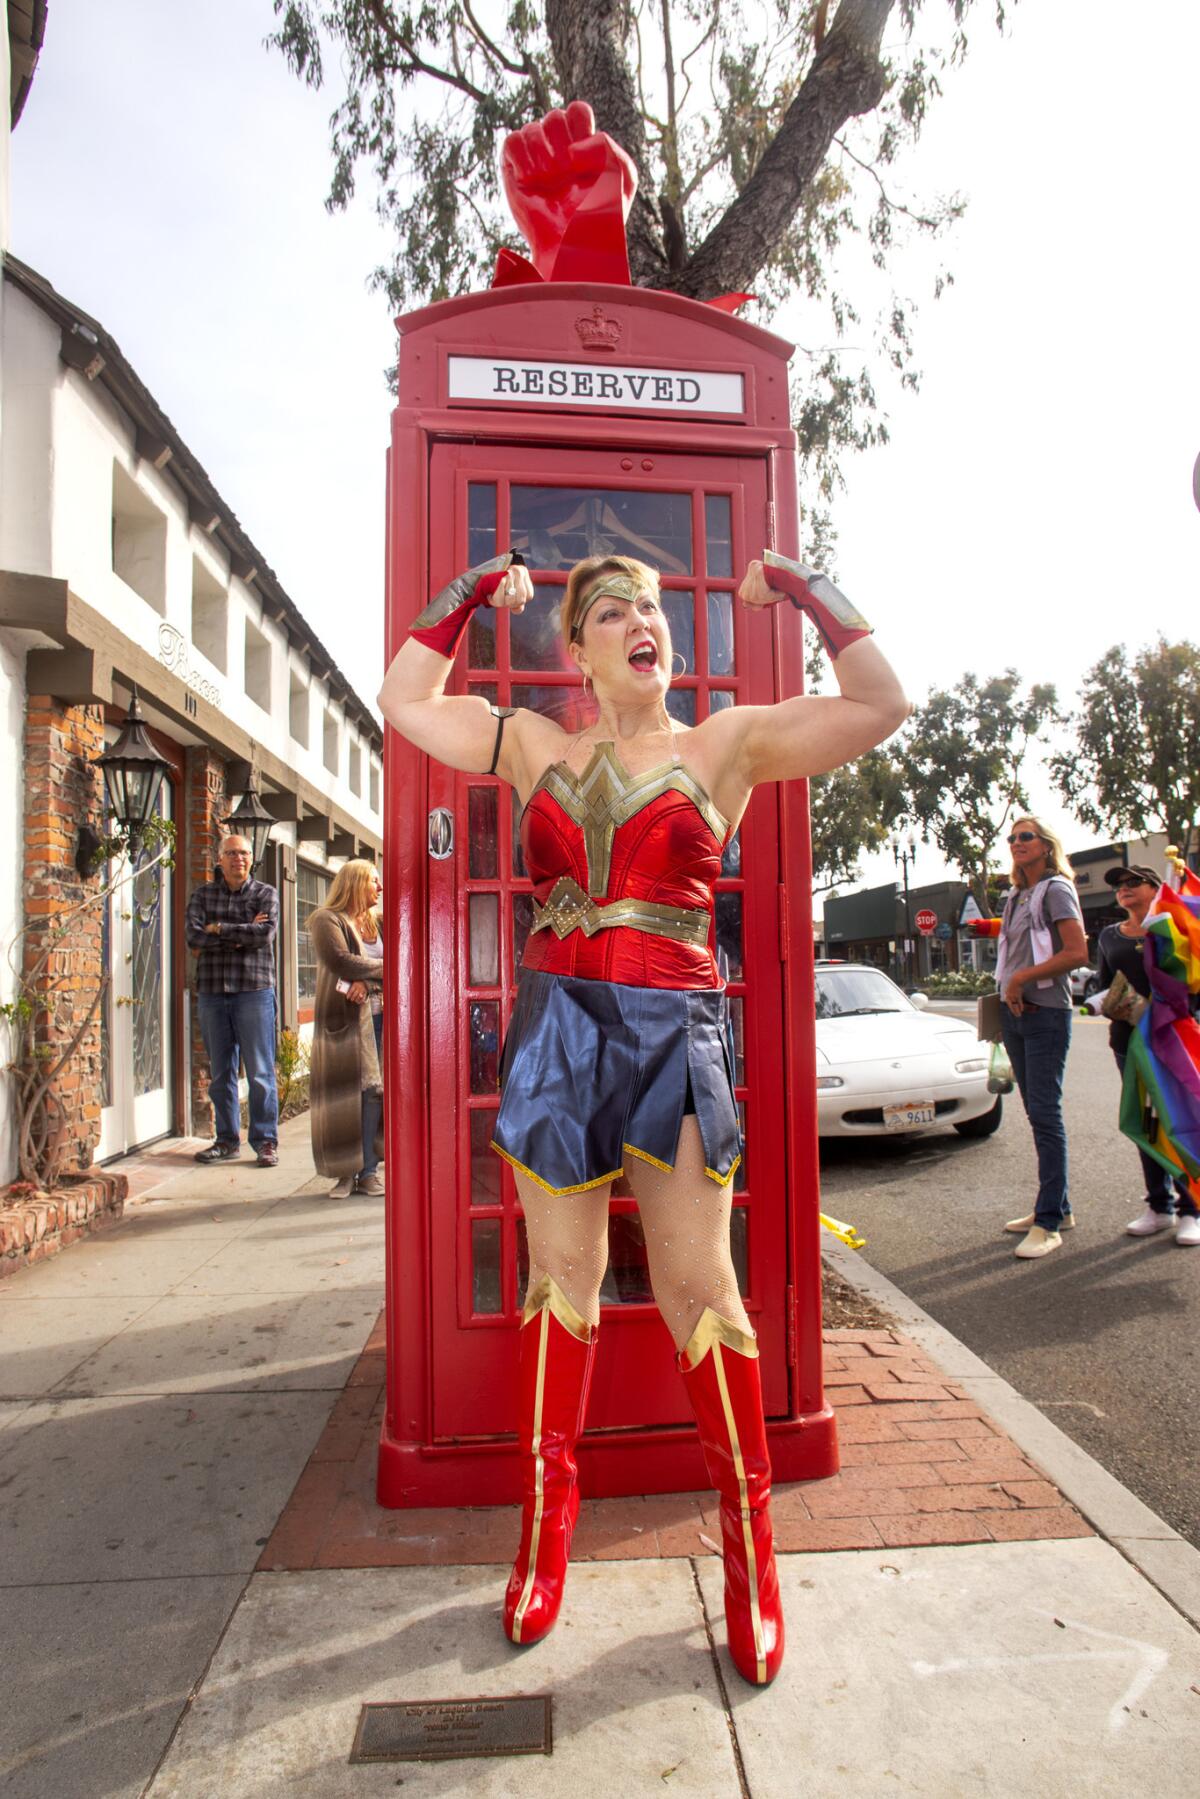 Heidi Miller, dressed as Wonder Woman, in front of Robert Holton's “Superhero Changing Station”